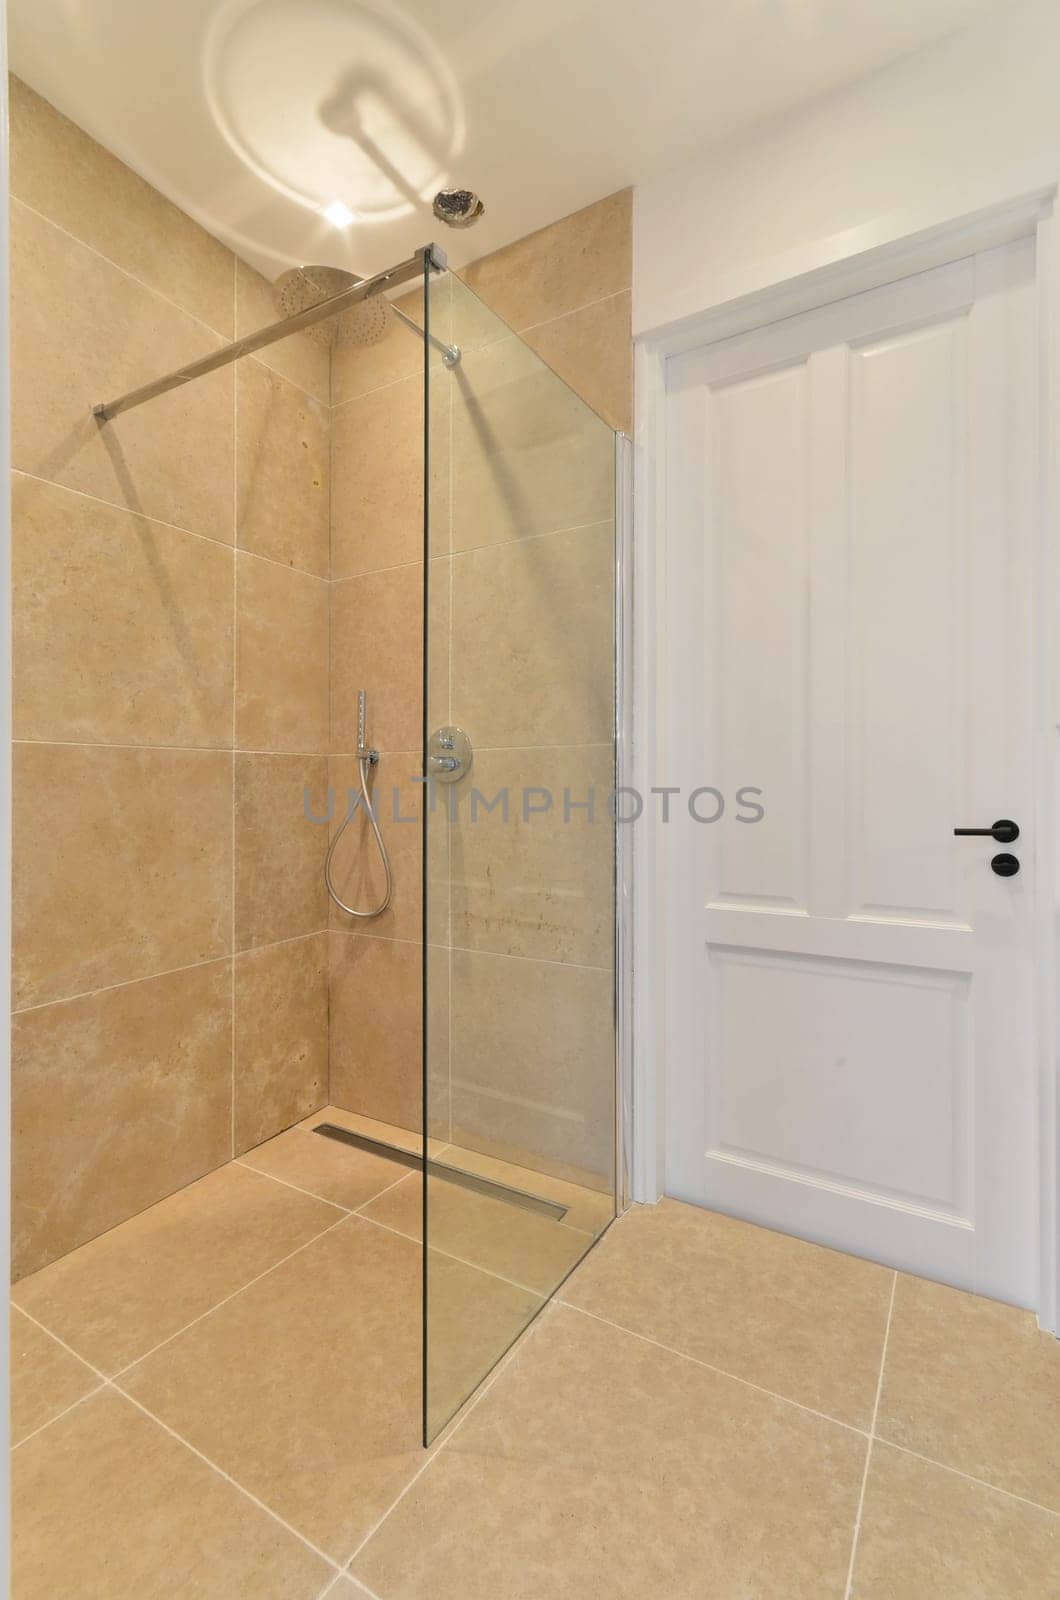 a walk in shower with beige tile flooring and white door leading to the bath room, which is tiled